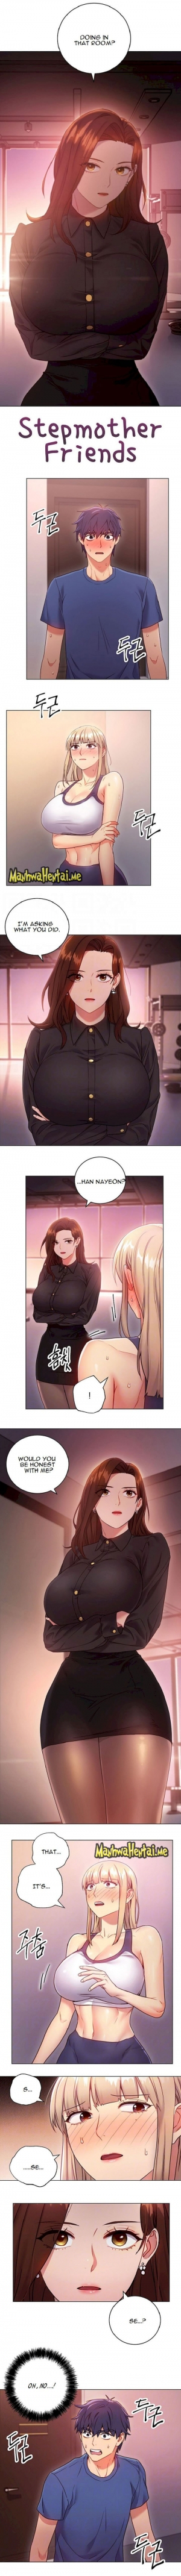  [Neck Pilllow] Stepmother Friends Ch.39/? [English] [Hentai Universe] NEW! 13/10/2020  - Page 179